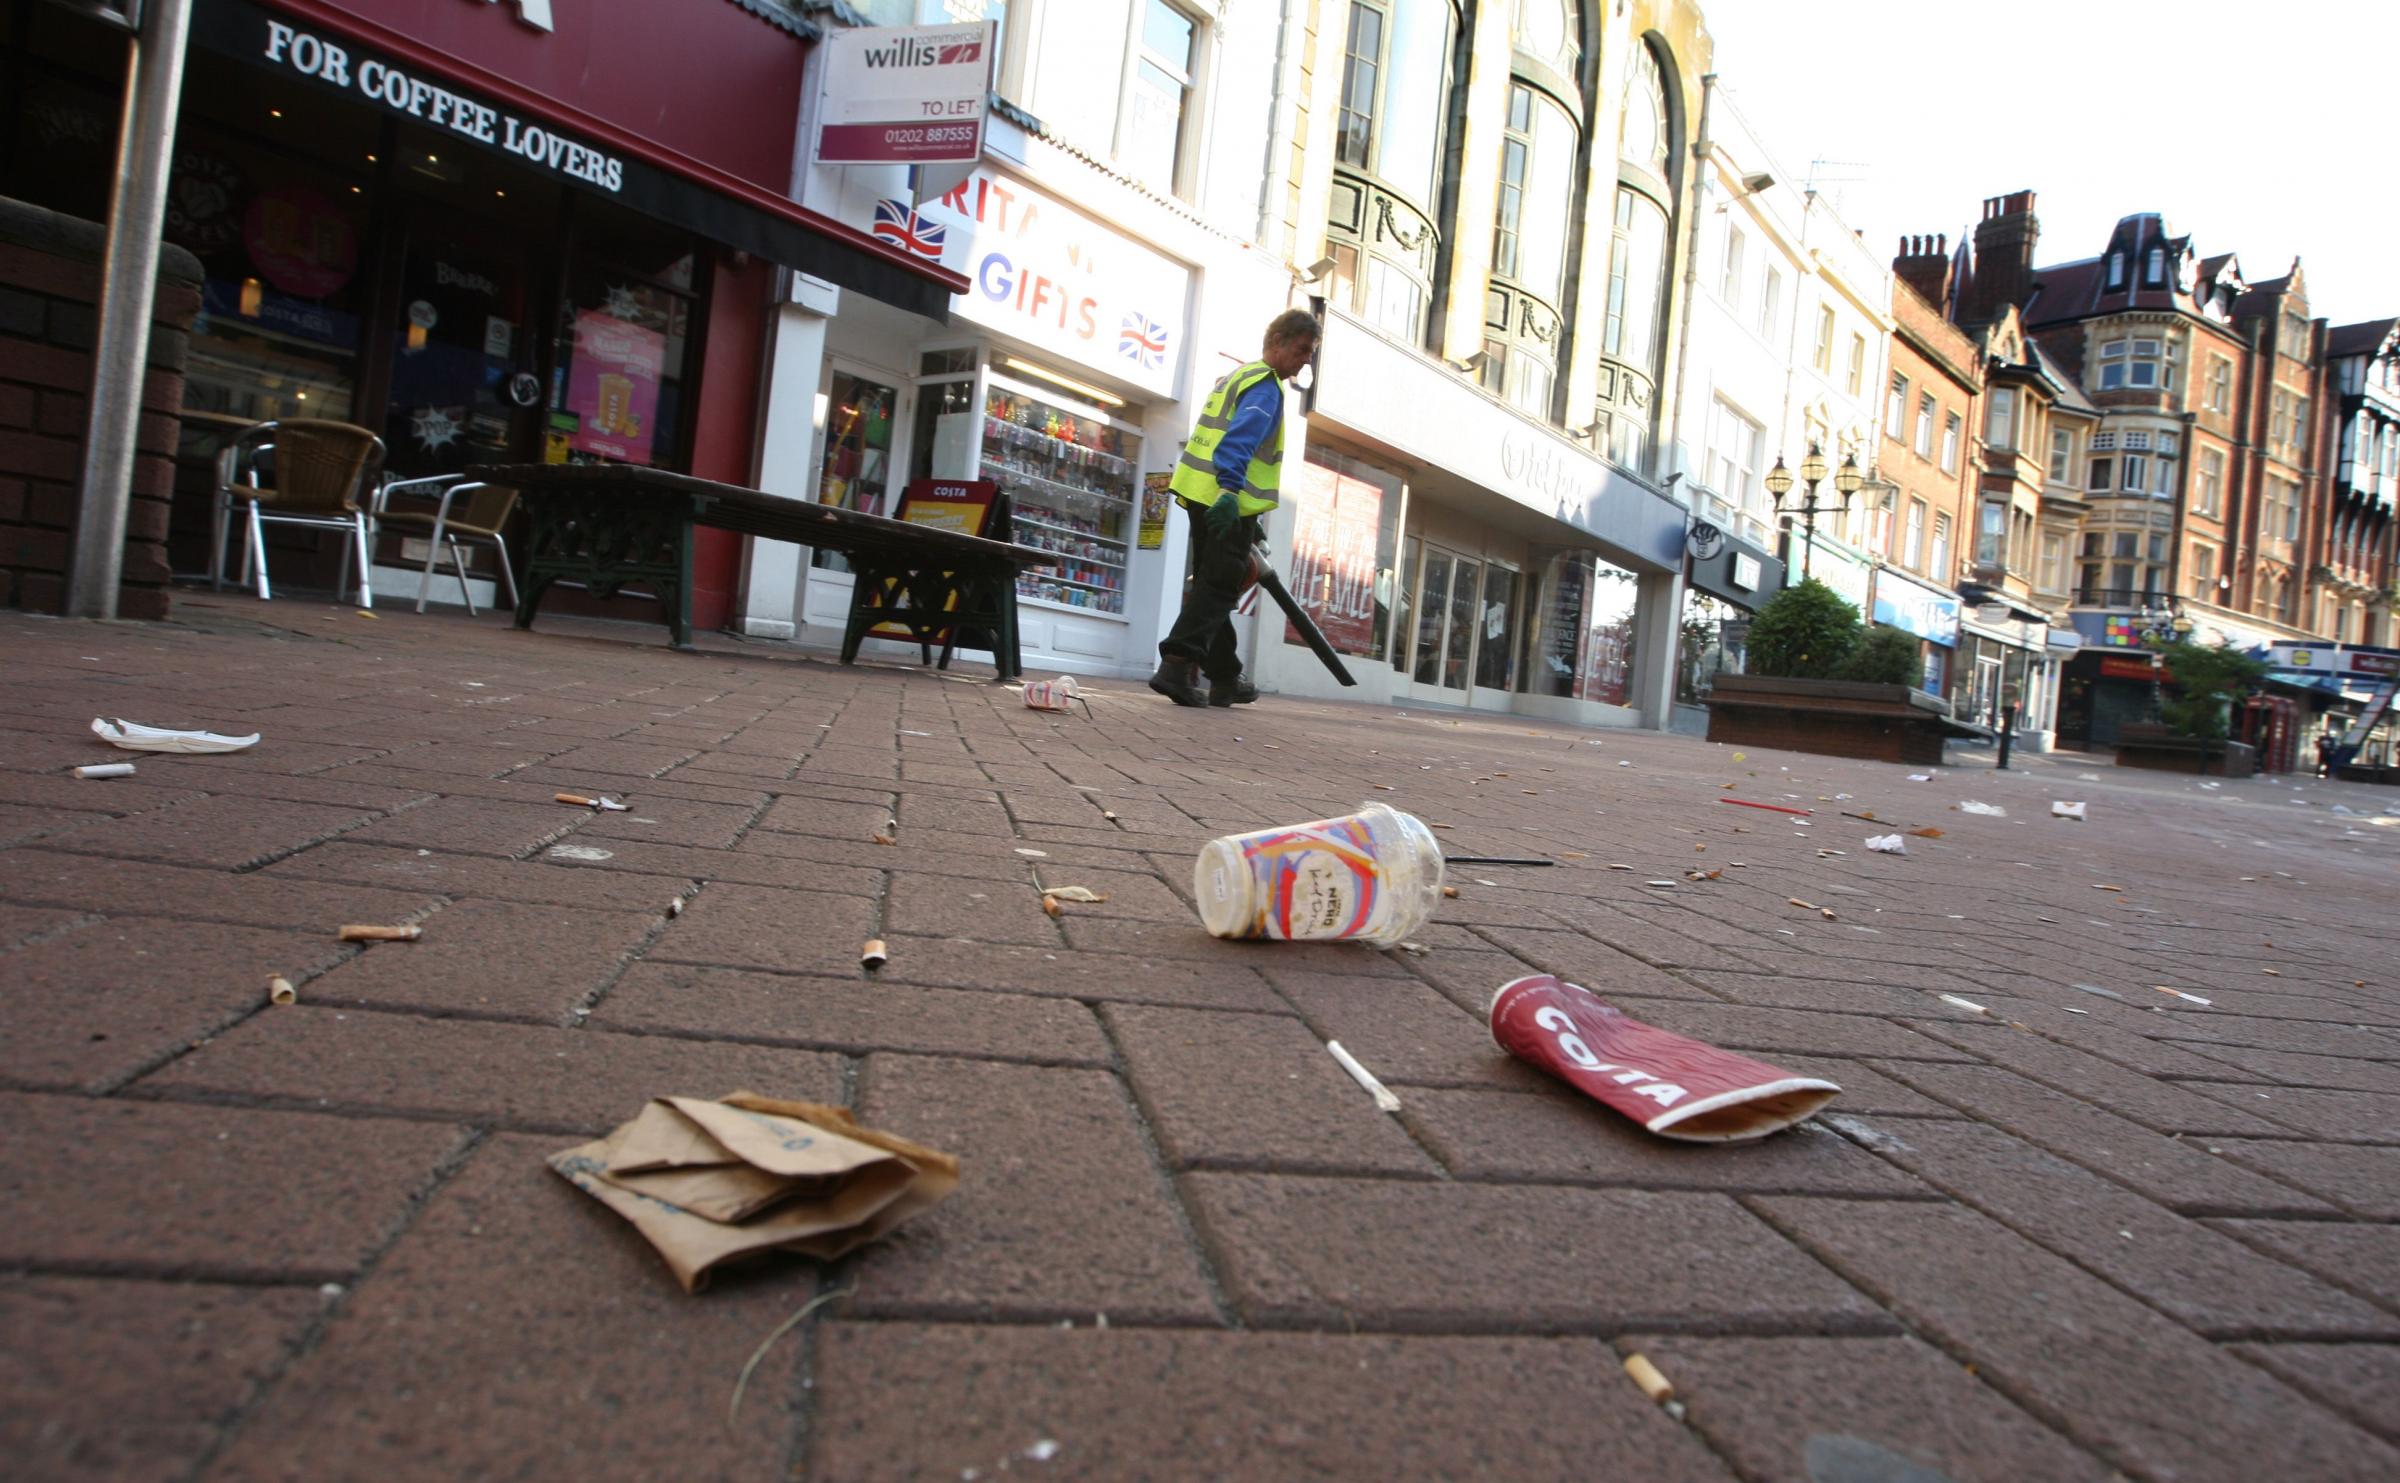 The long-term littering saga – do charity’s efforts hold the answer?